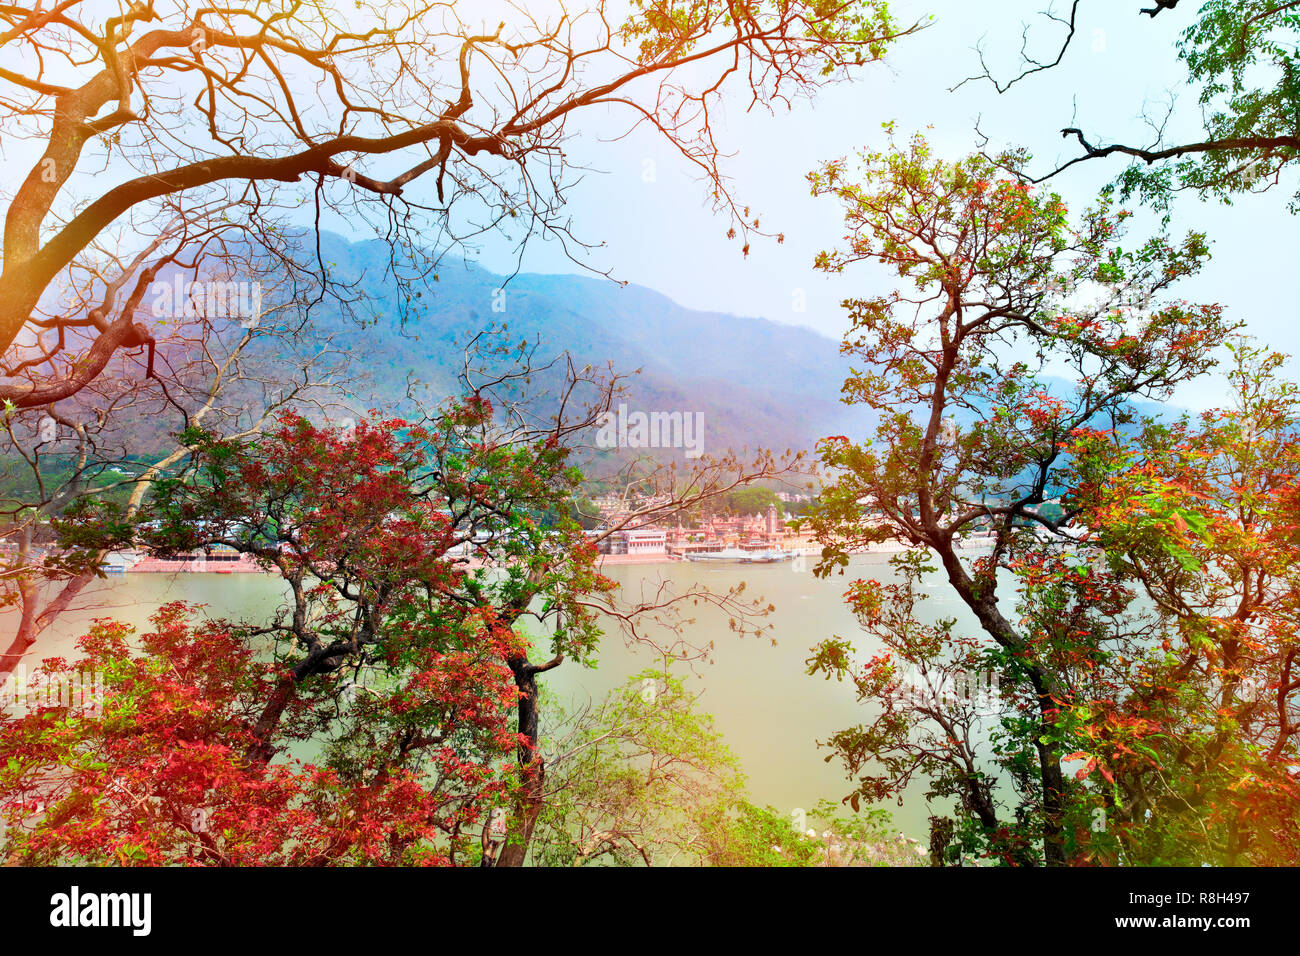 Rishikesh, holy town and travel destination in India. River side view. Stock Photo